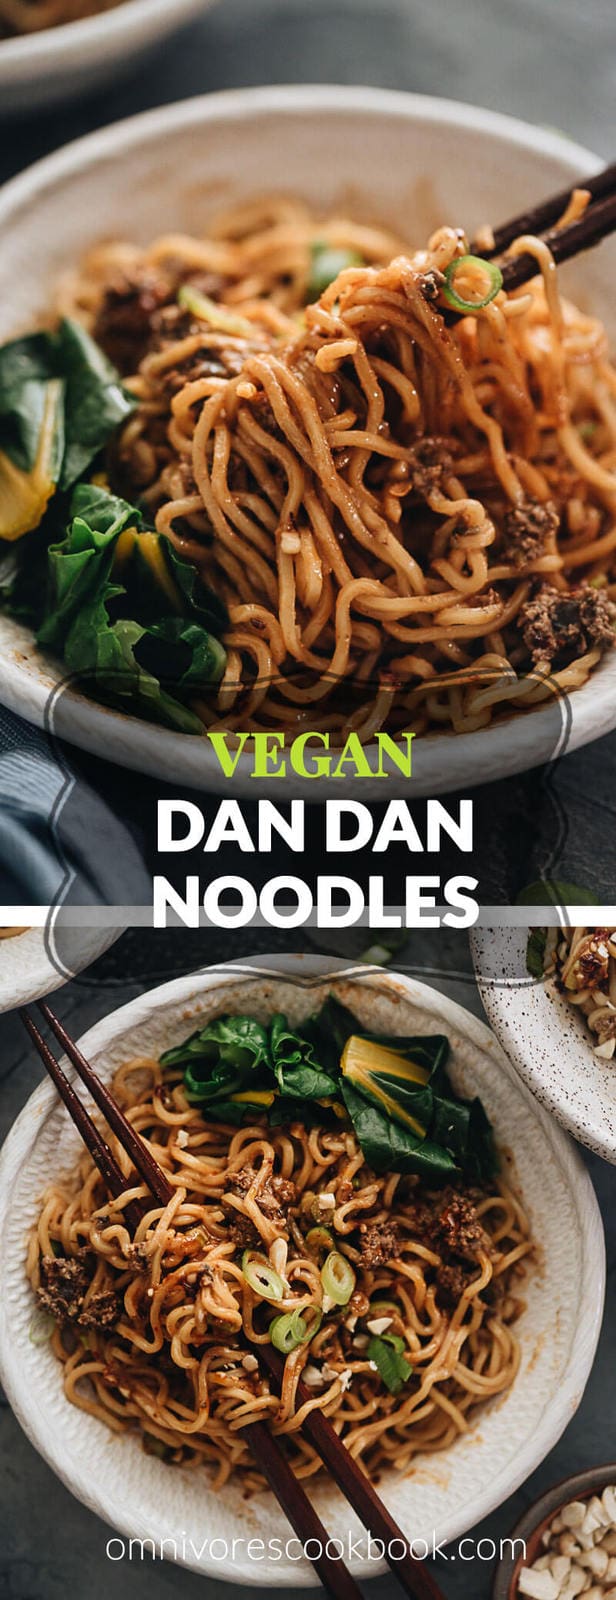 Vegan Dan Dan noodles - The tender noodles are served with a rich sauce that is nutty, spicy, and extra fragrant, with a hint of sweetness. It also comes with a vegan recipe for a flavorful “meat” topping that tastes great and clings to the noodles, just like real meat. Be careful, this dish is addictively tasty! {Gluten Free adaptable} #chinese #recipes